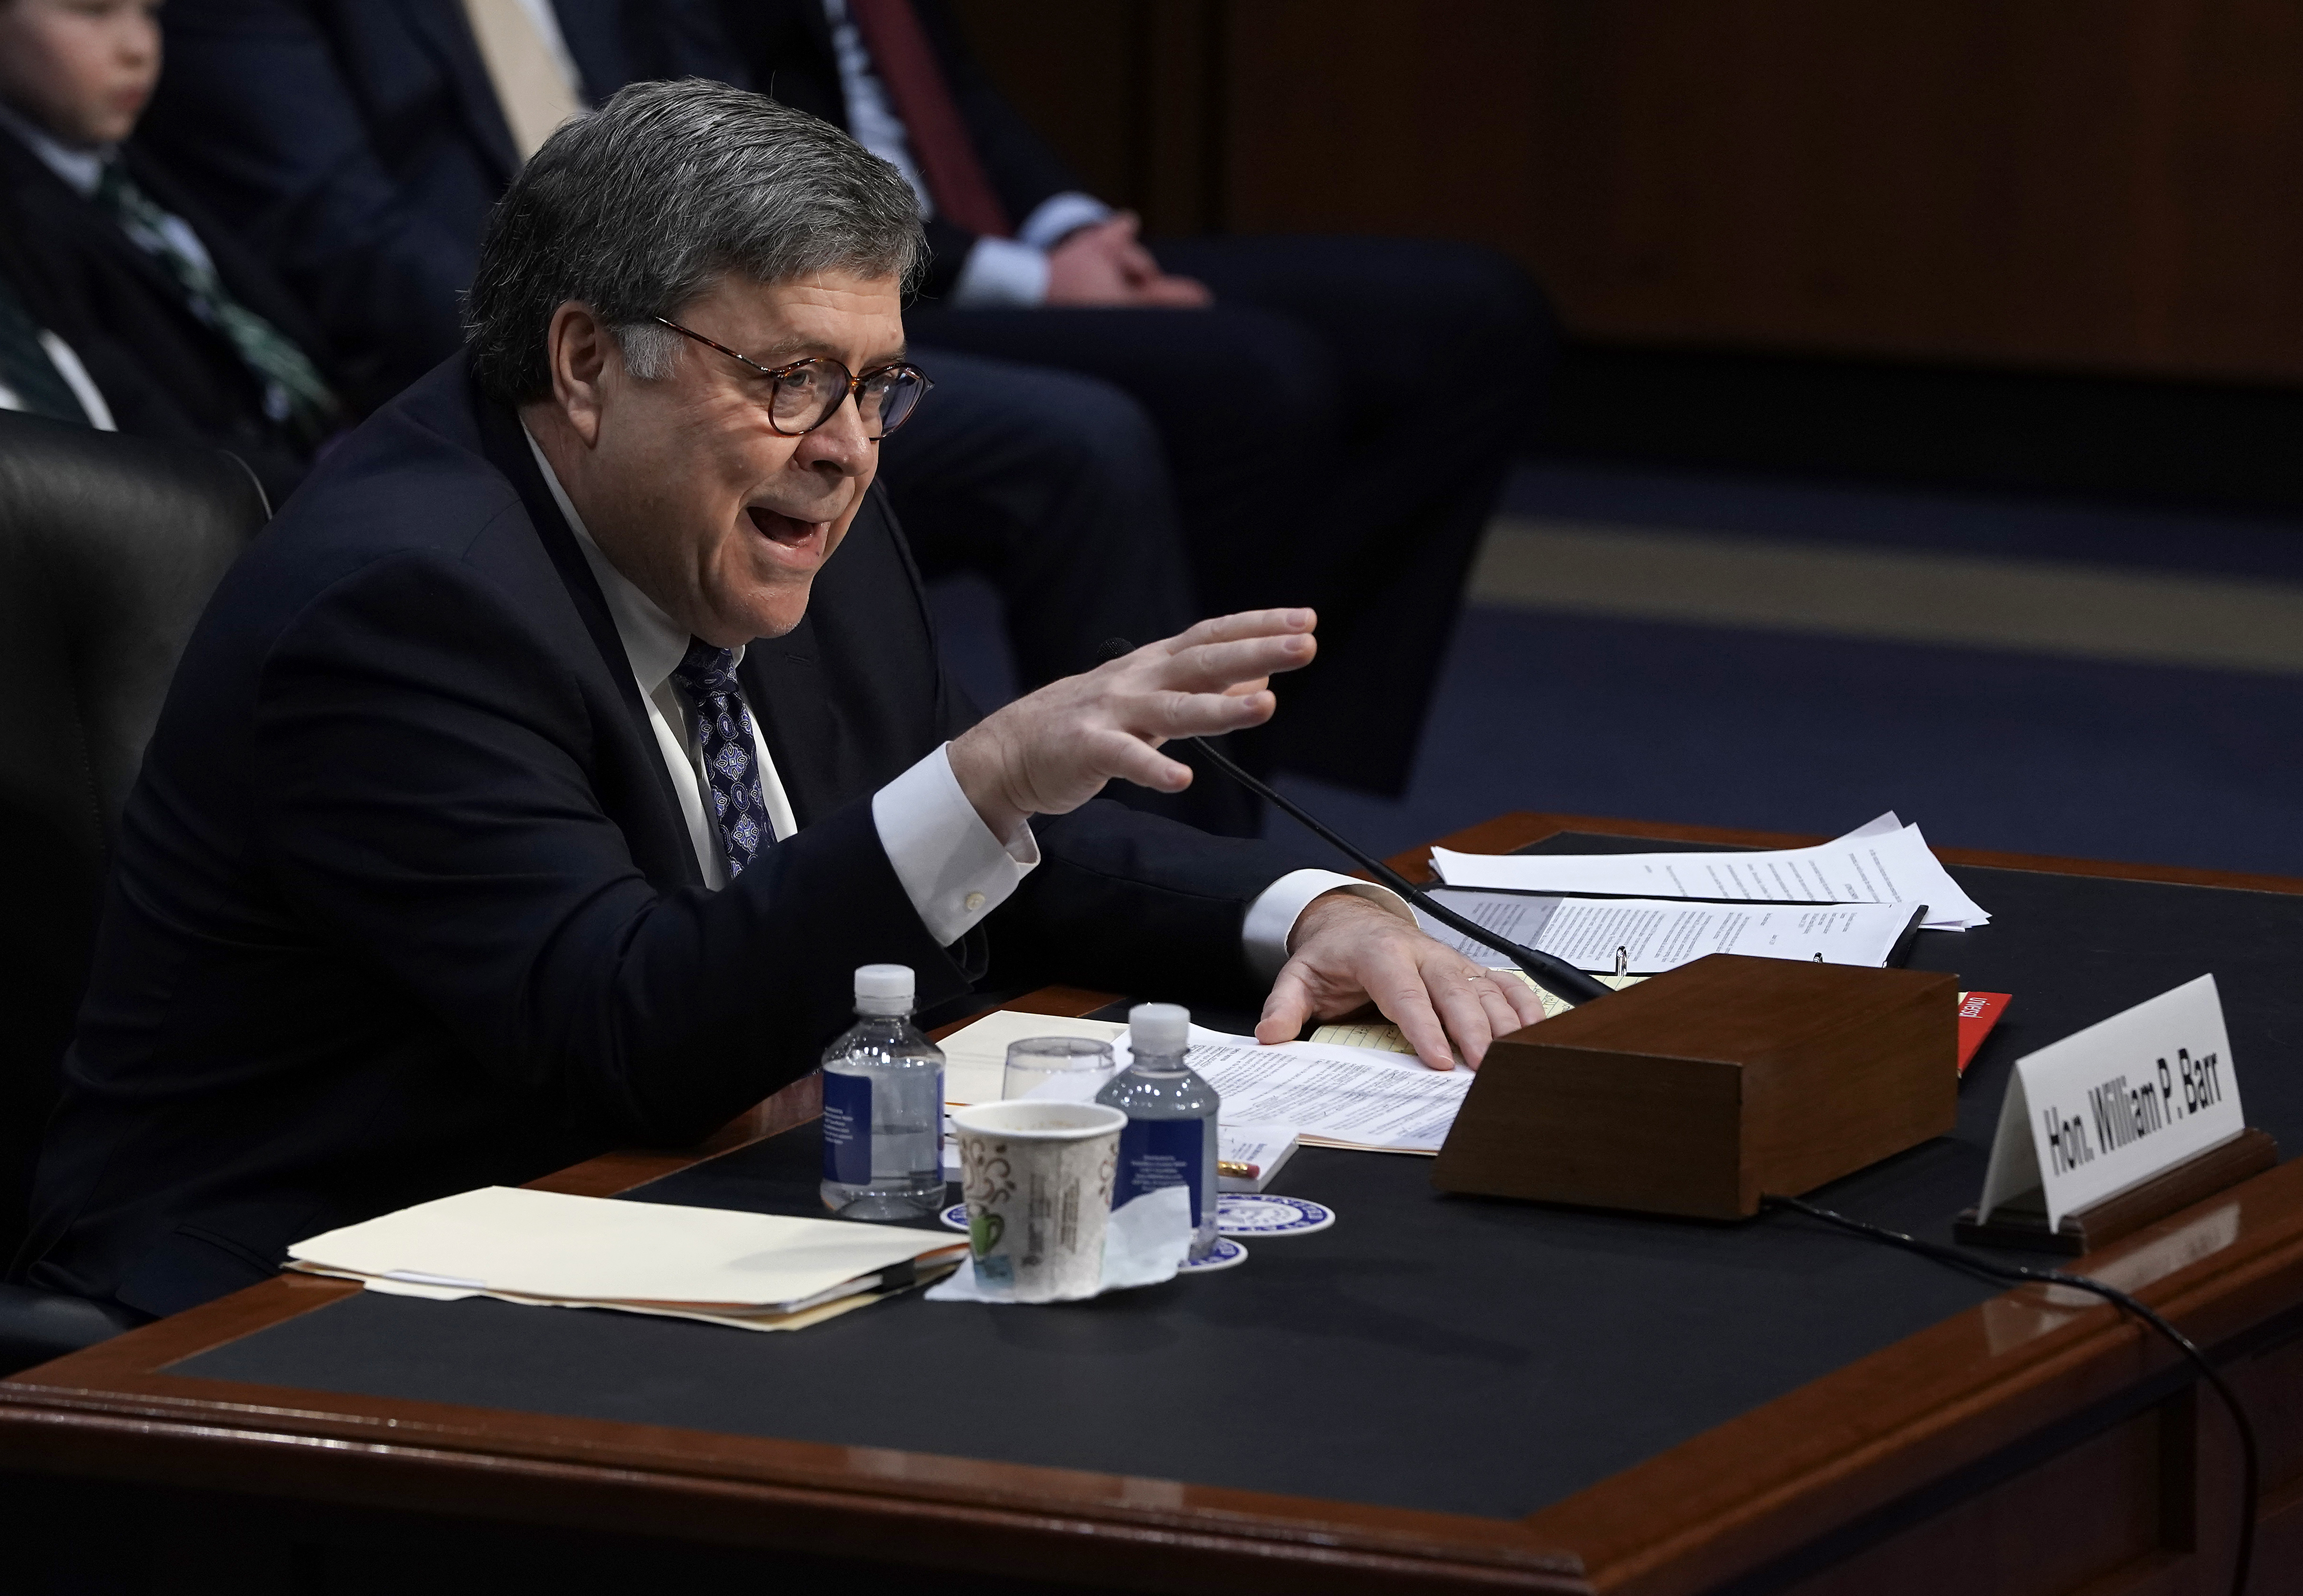 Attorney General nominee William Barr testifies at his confirmation hearing before the Senate Judiciary Committee on January 15, 2019 in Washington, D.C. (Alex Wong/Getty Images)